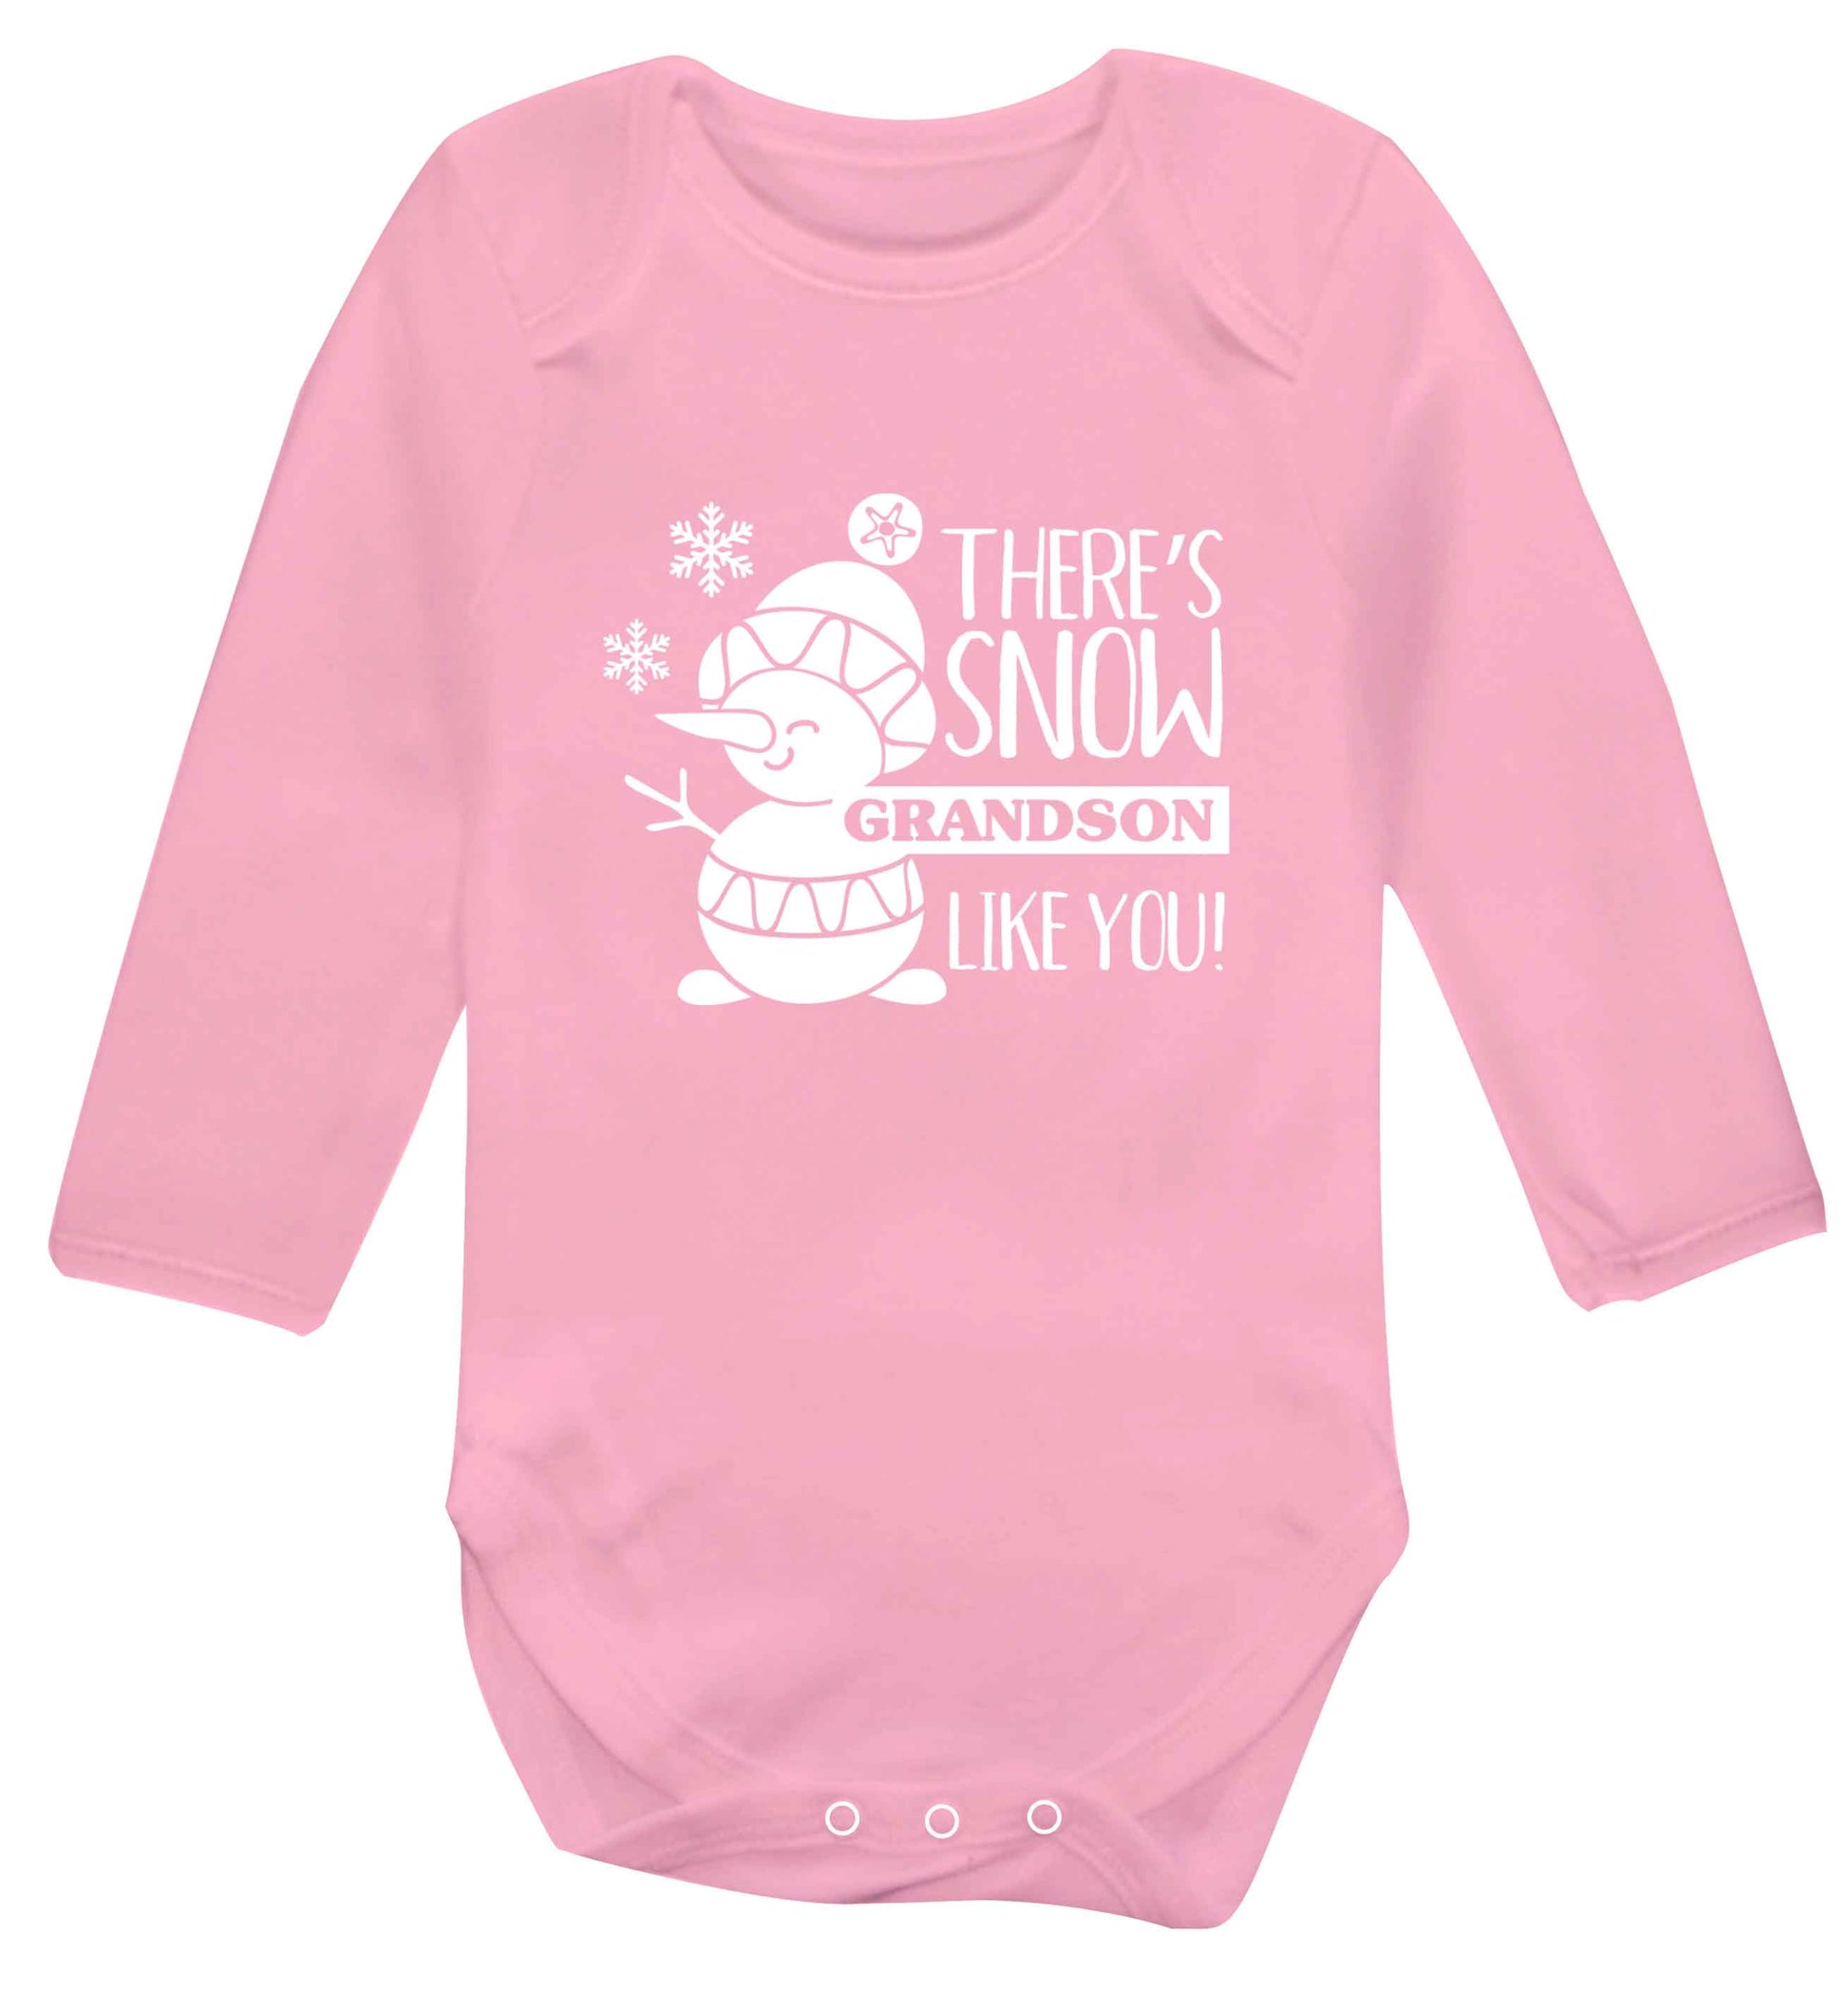 There's snow grandson like you baby vest long sleeved pale pink 6-12 months